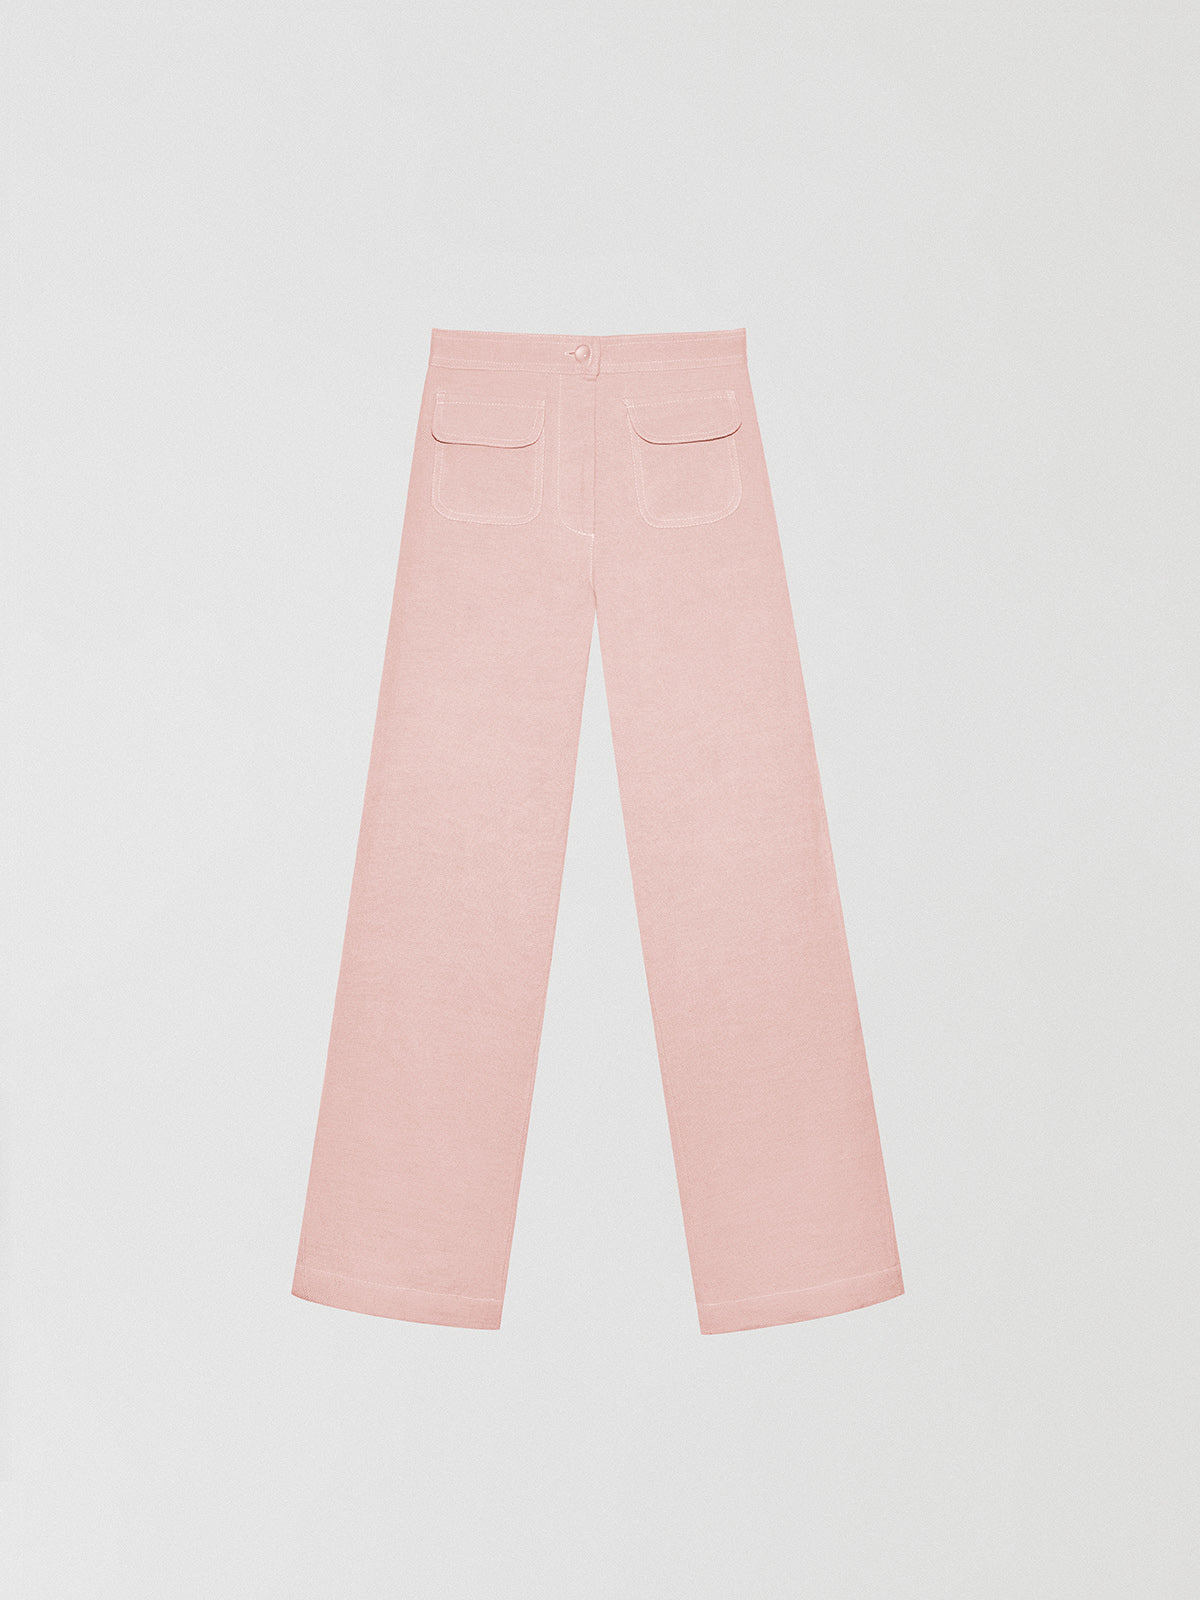 Baby pink high-waisted linen trousers with pockets. 